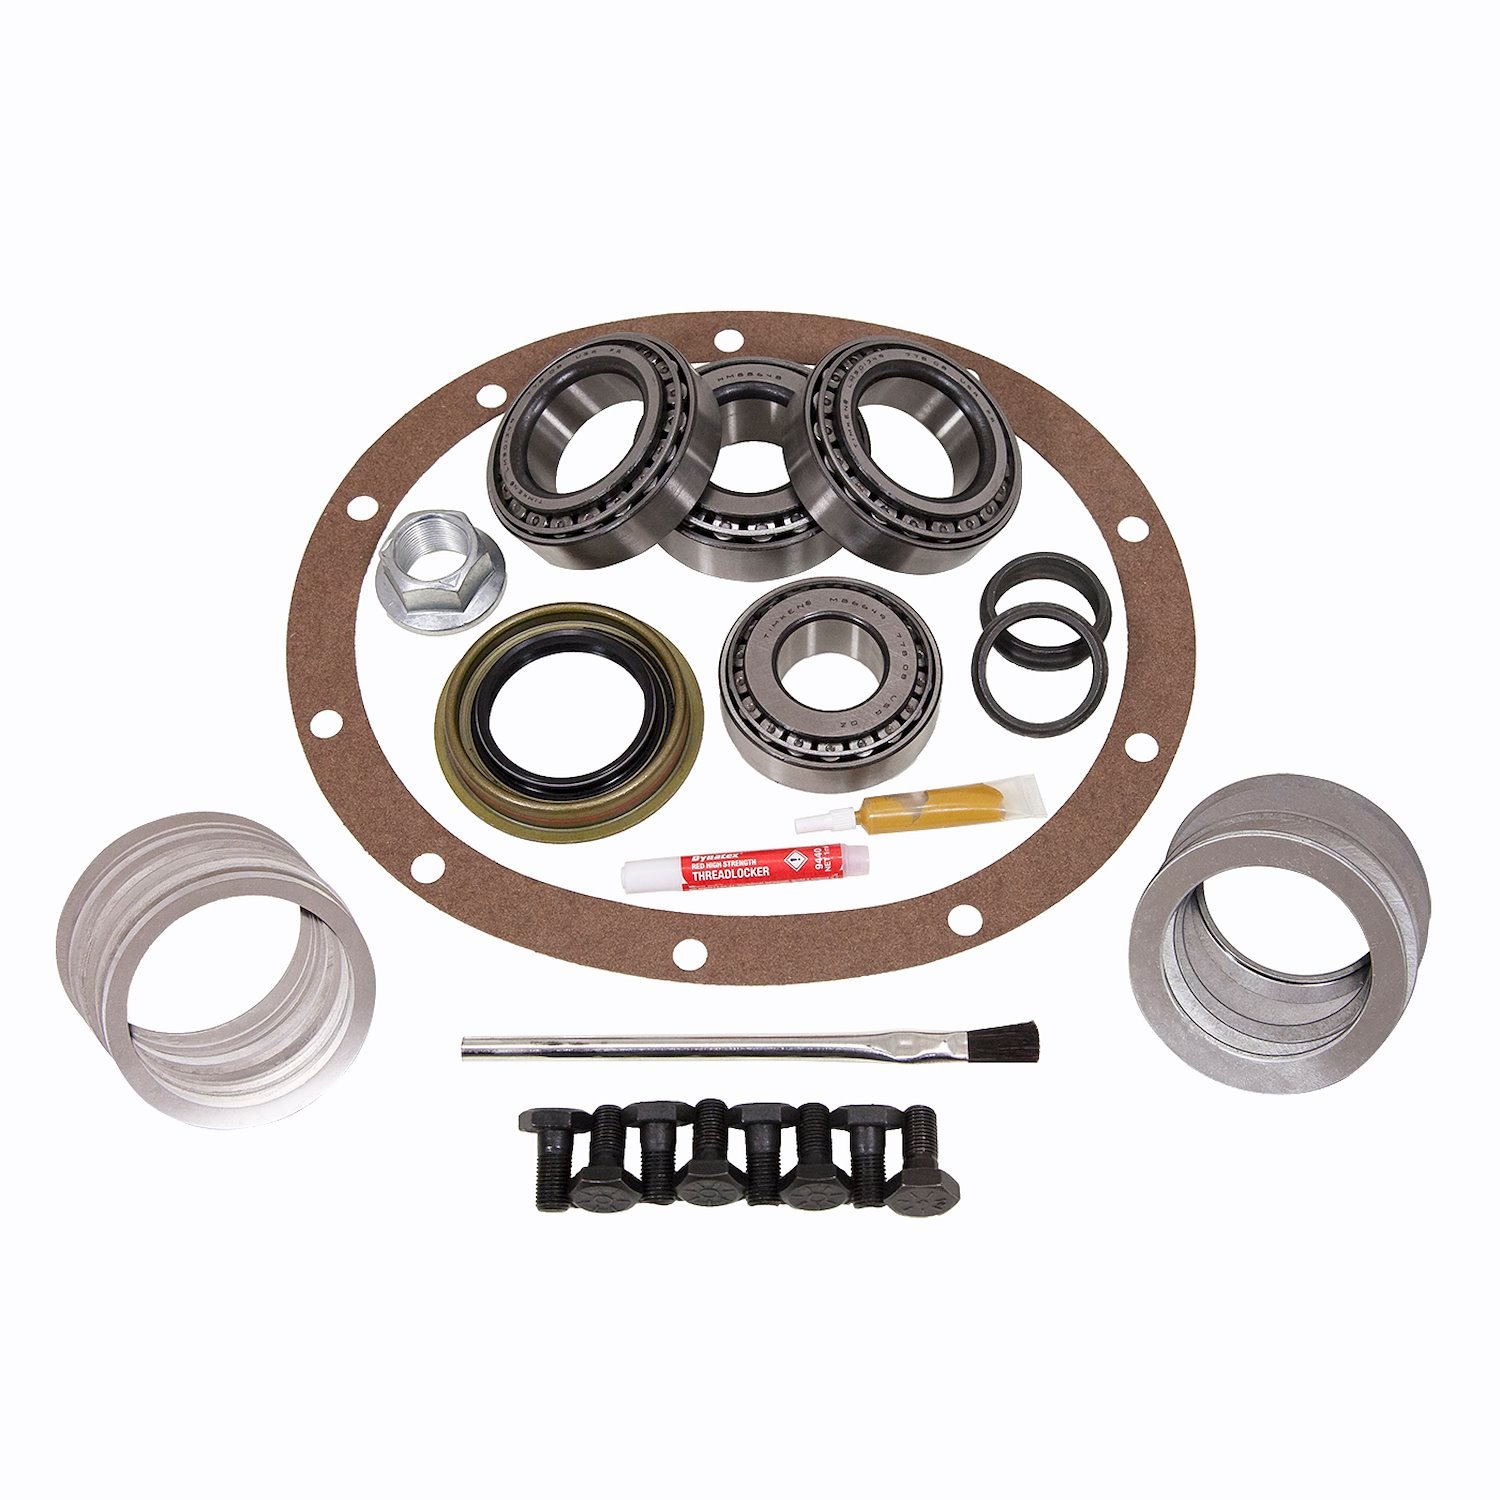 Master Overhaul Kit For The '99 And Newer Wj Model 35 Differential